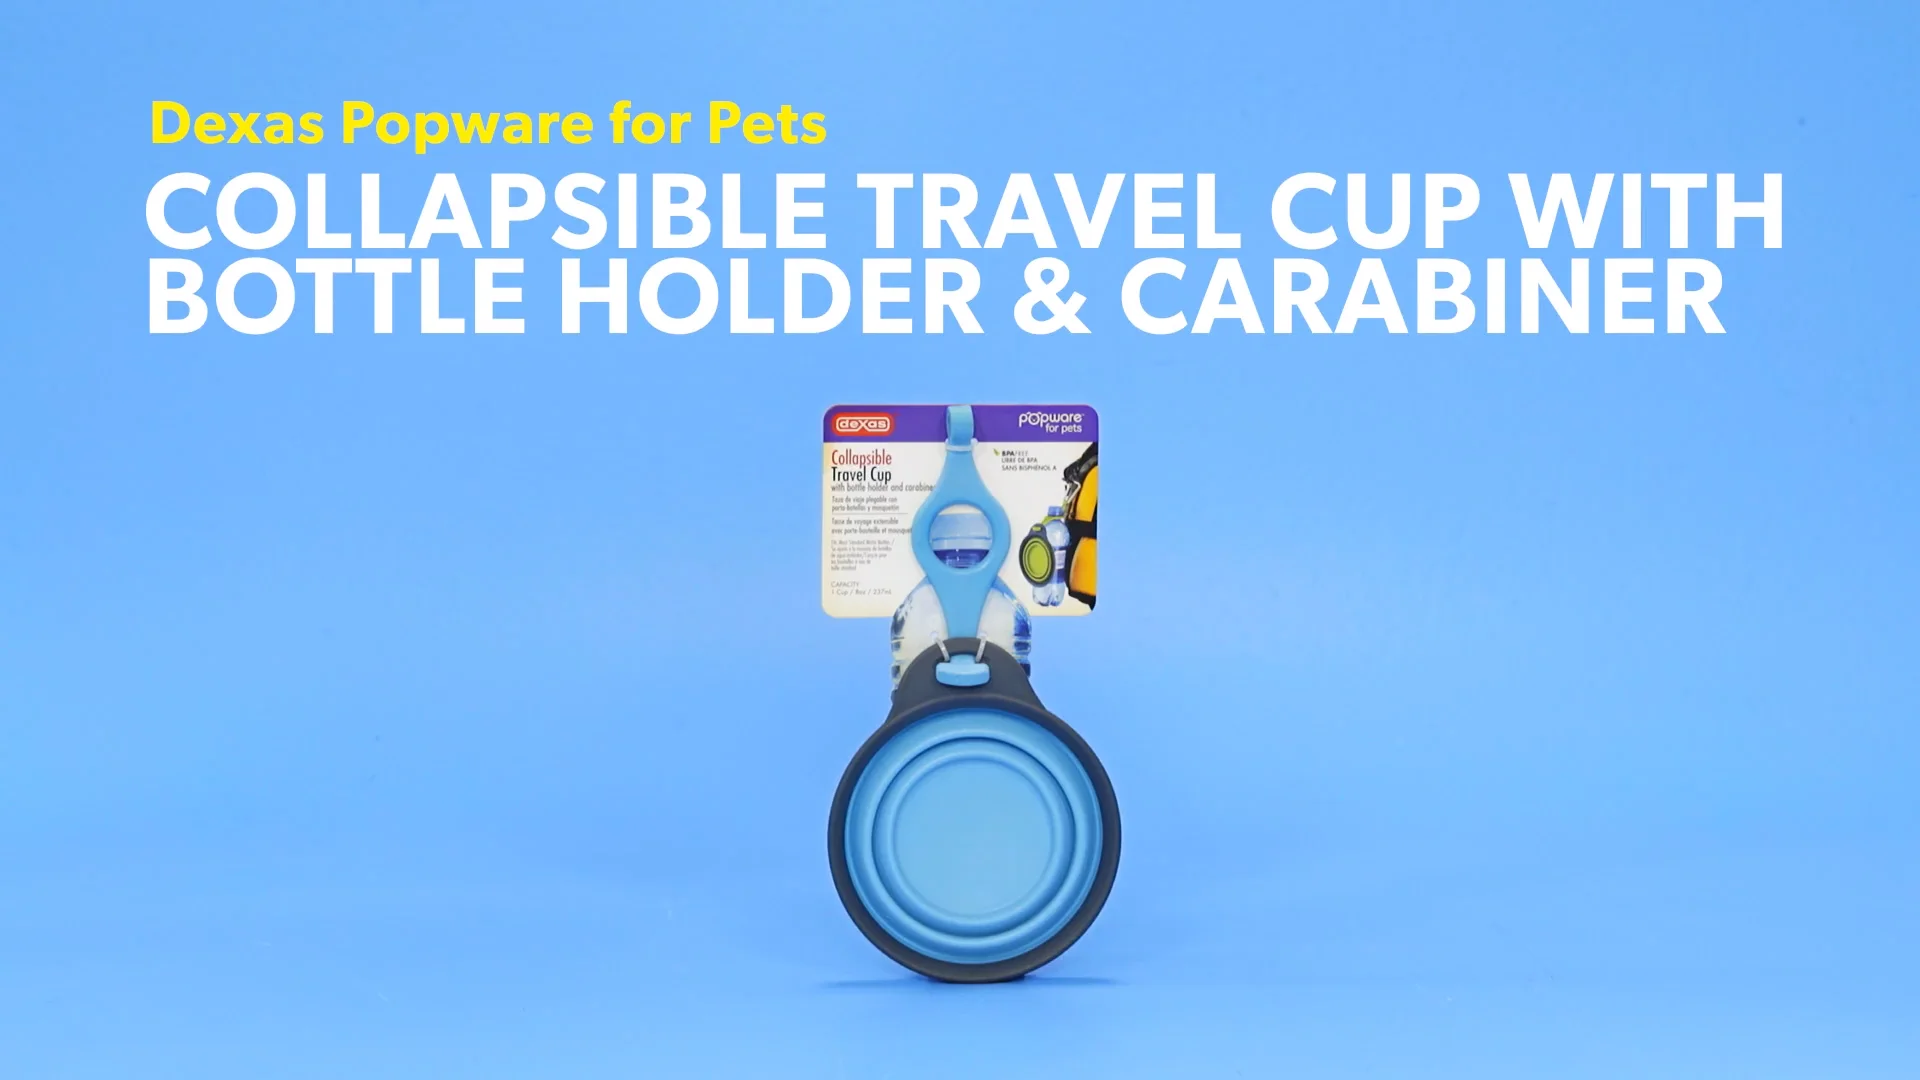 DEXAS Popware Collapsible TRAVEL CUP Food Water Pet Bowl Dish with Clip Bottle